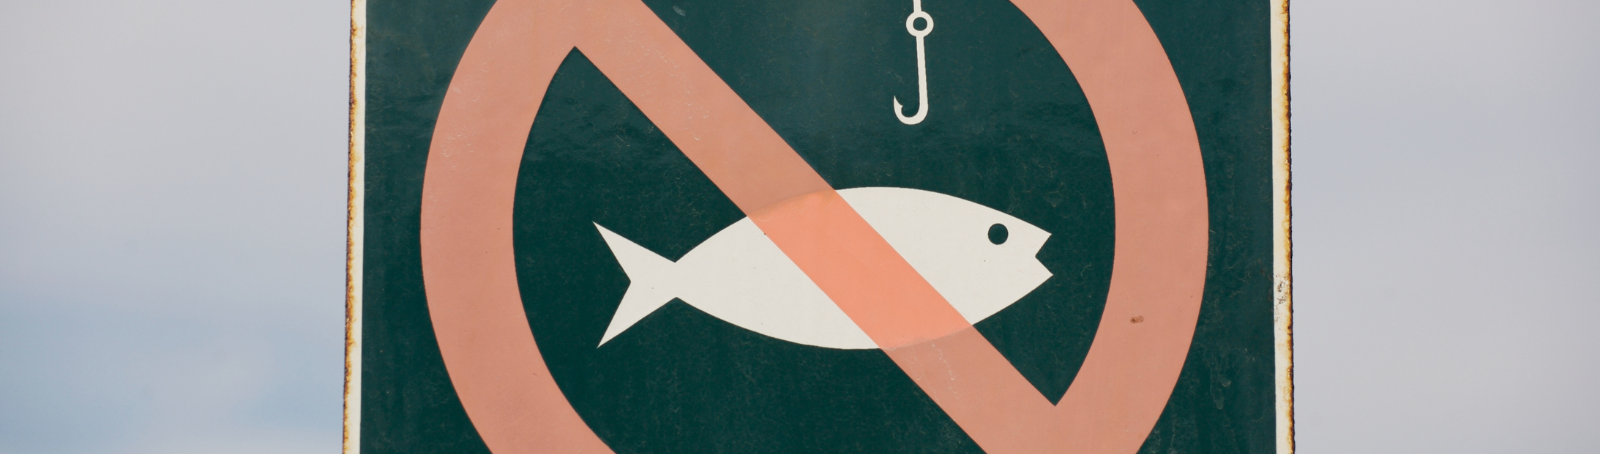 Fishing Laws and Regulations: Navigating the Complexities with Pimaccounting’s Legal and Accounting Expertise